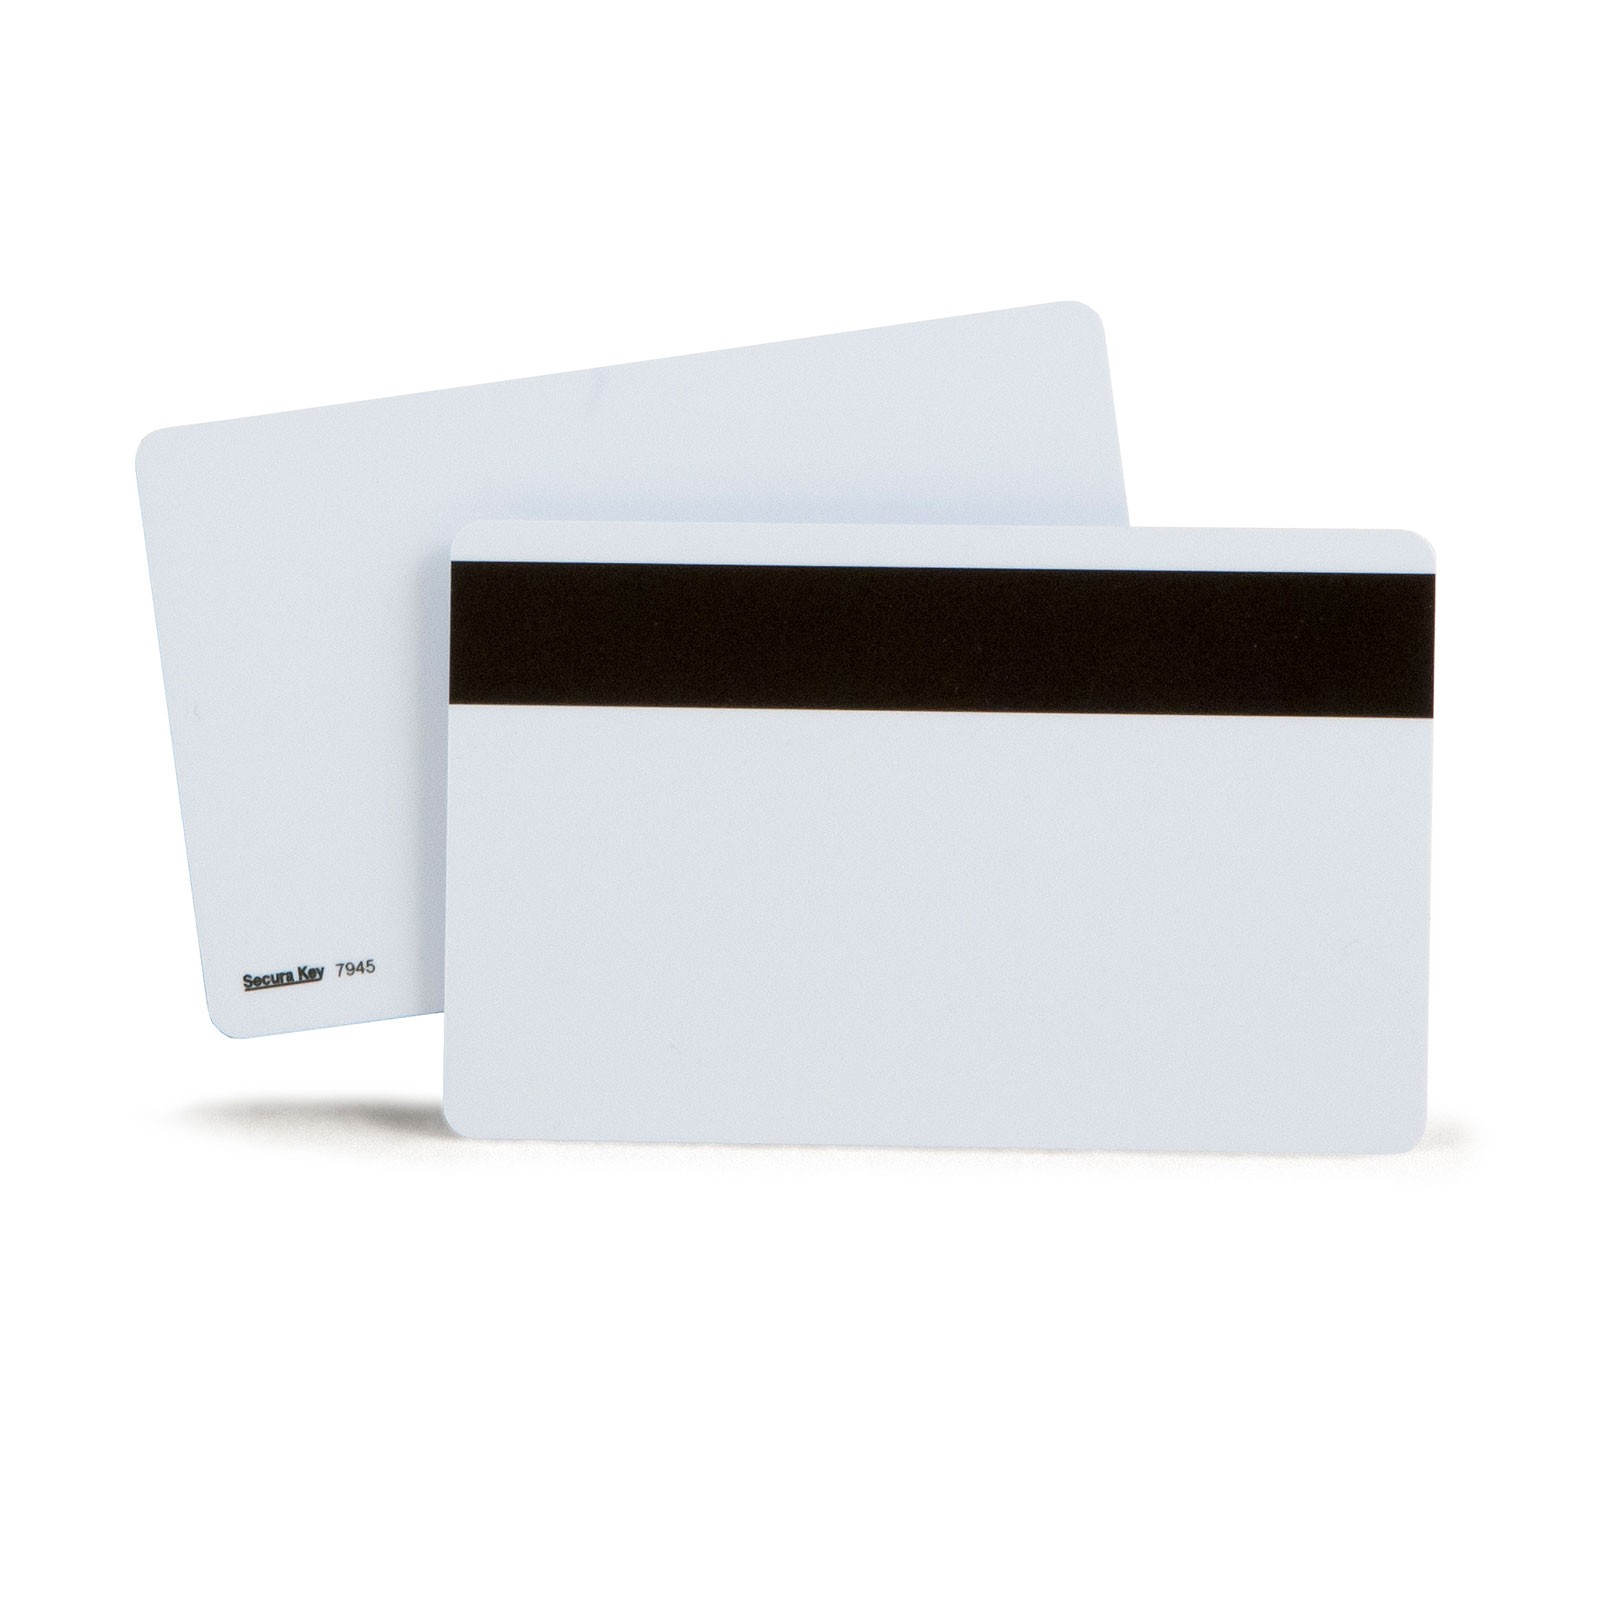 High Quality ISO Magnetic Stripe (Magstripe) Cards